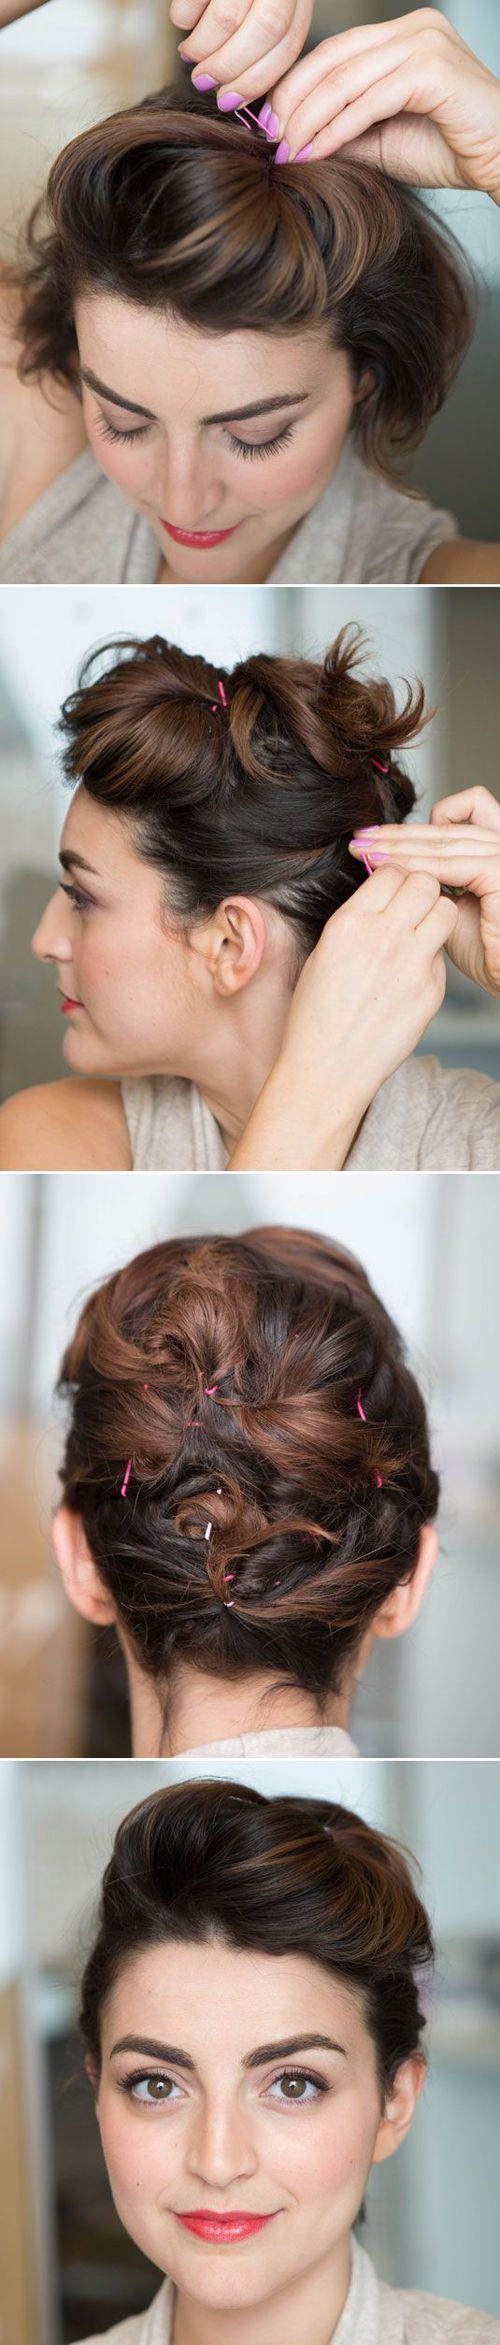 20 simple hairstyles for short hair